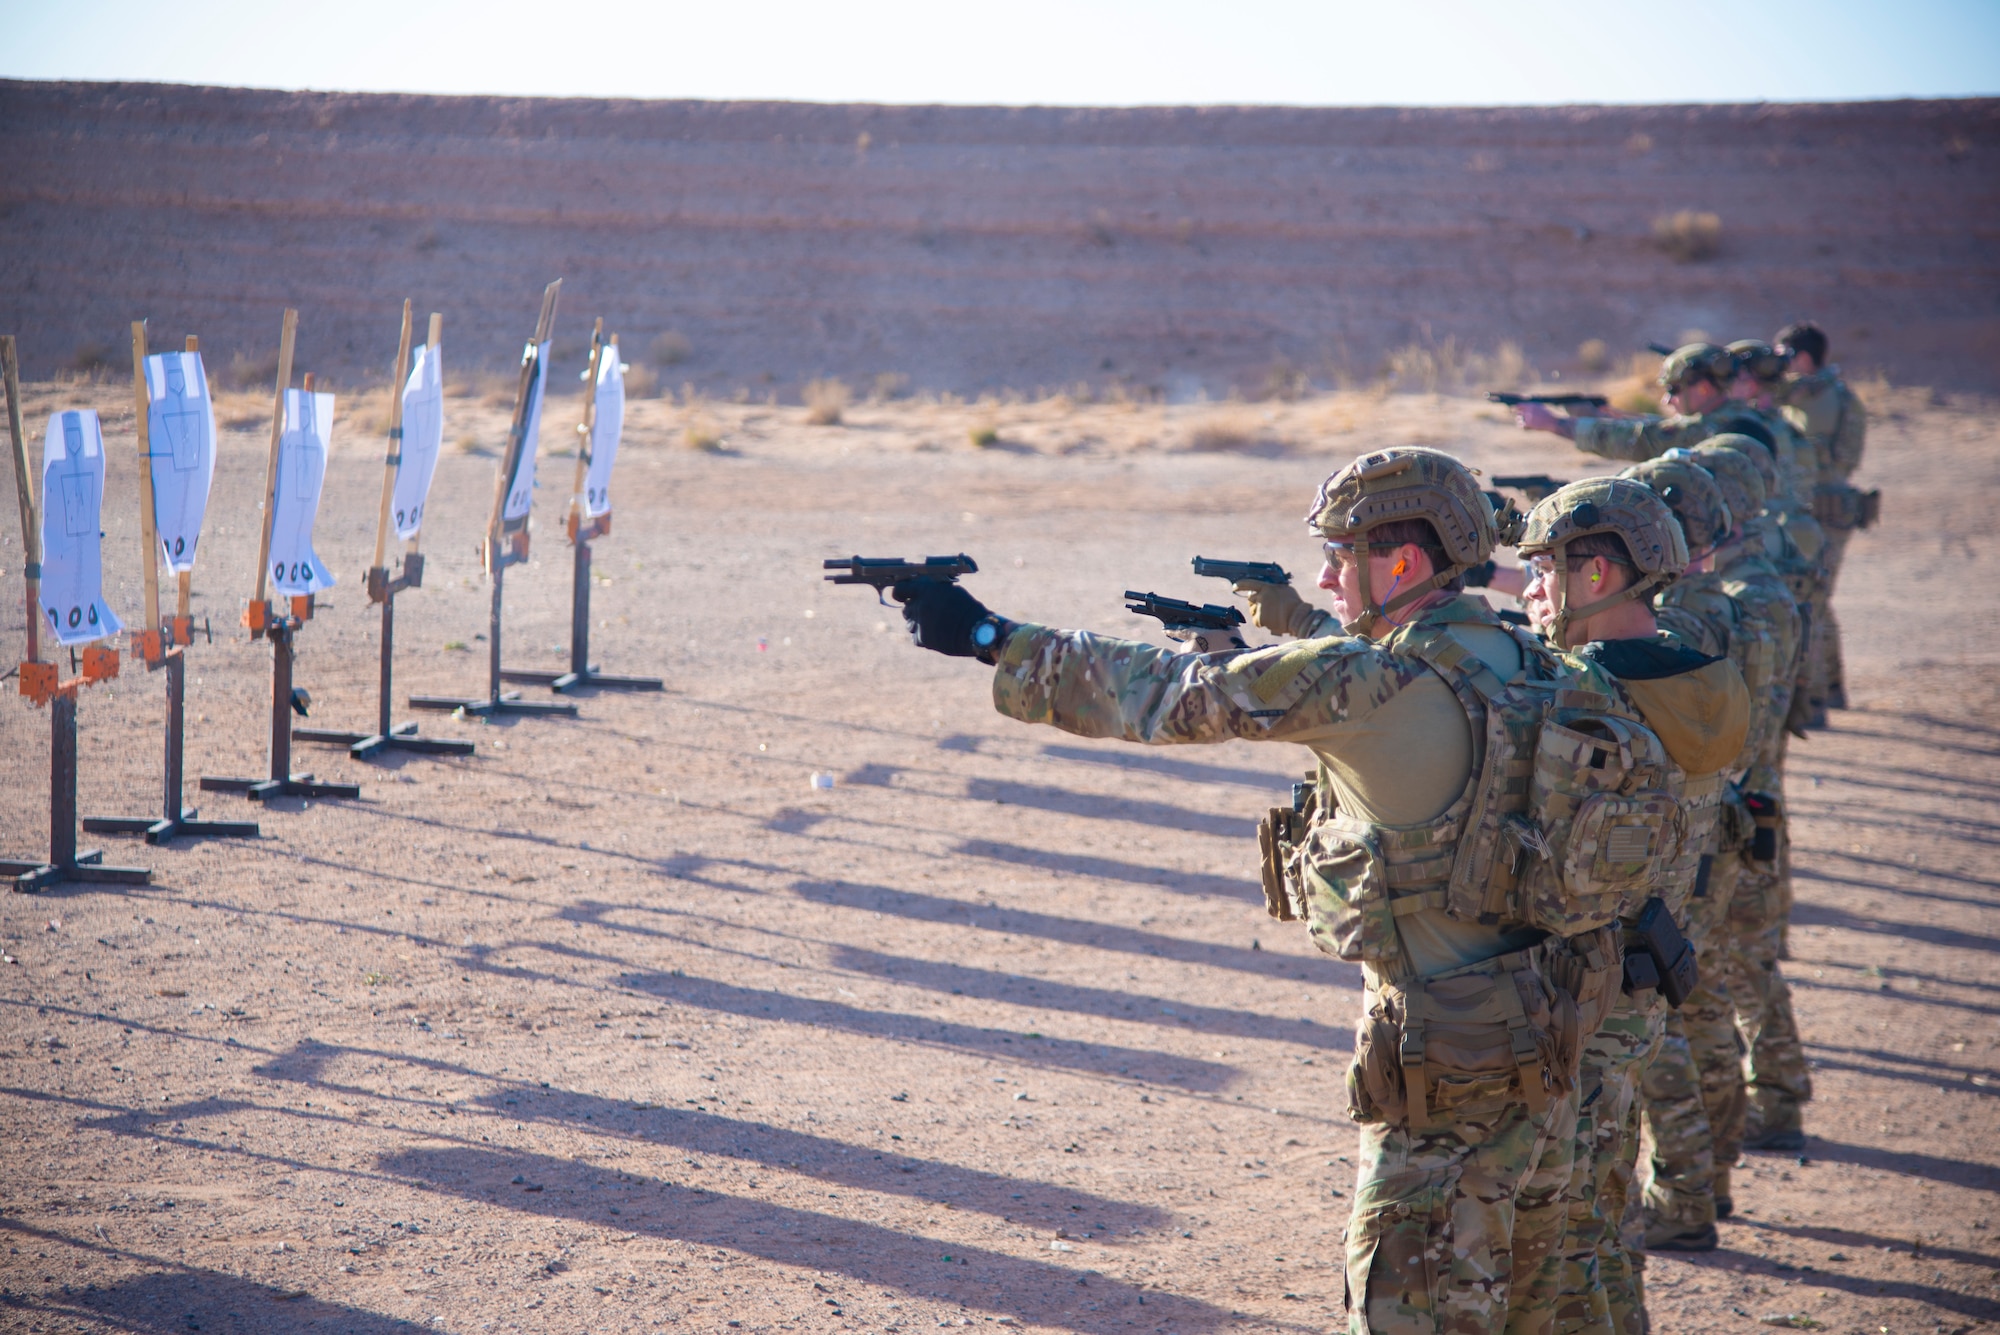 U.S. Air Force Tactical Air Control Party specialists shoot a Beretta M-9 during the 2021 Wraith Challenge, April 21, 2021, on Fort Bliss Rod and Gun Club, Texas. The TACP specialists went through the Navy qualification course of fire to test their firing ability in nonstandard positions. (U.S. Air Force photo by Airman 1st Class Jessica Sanchez)